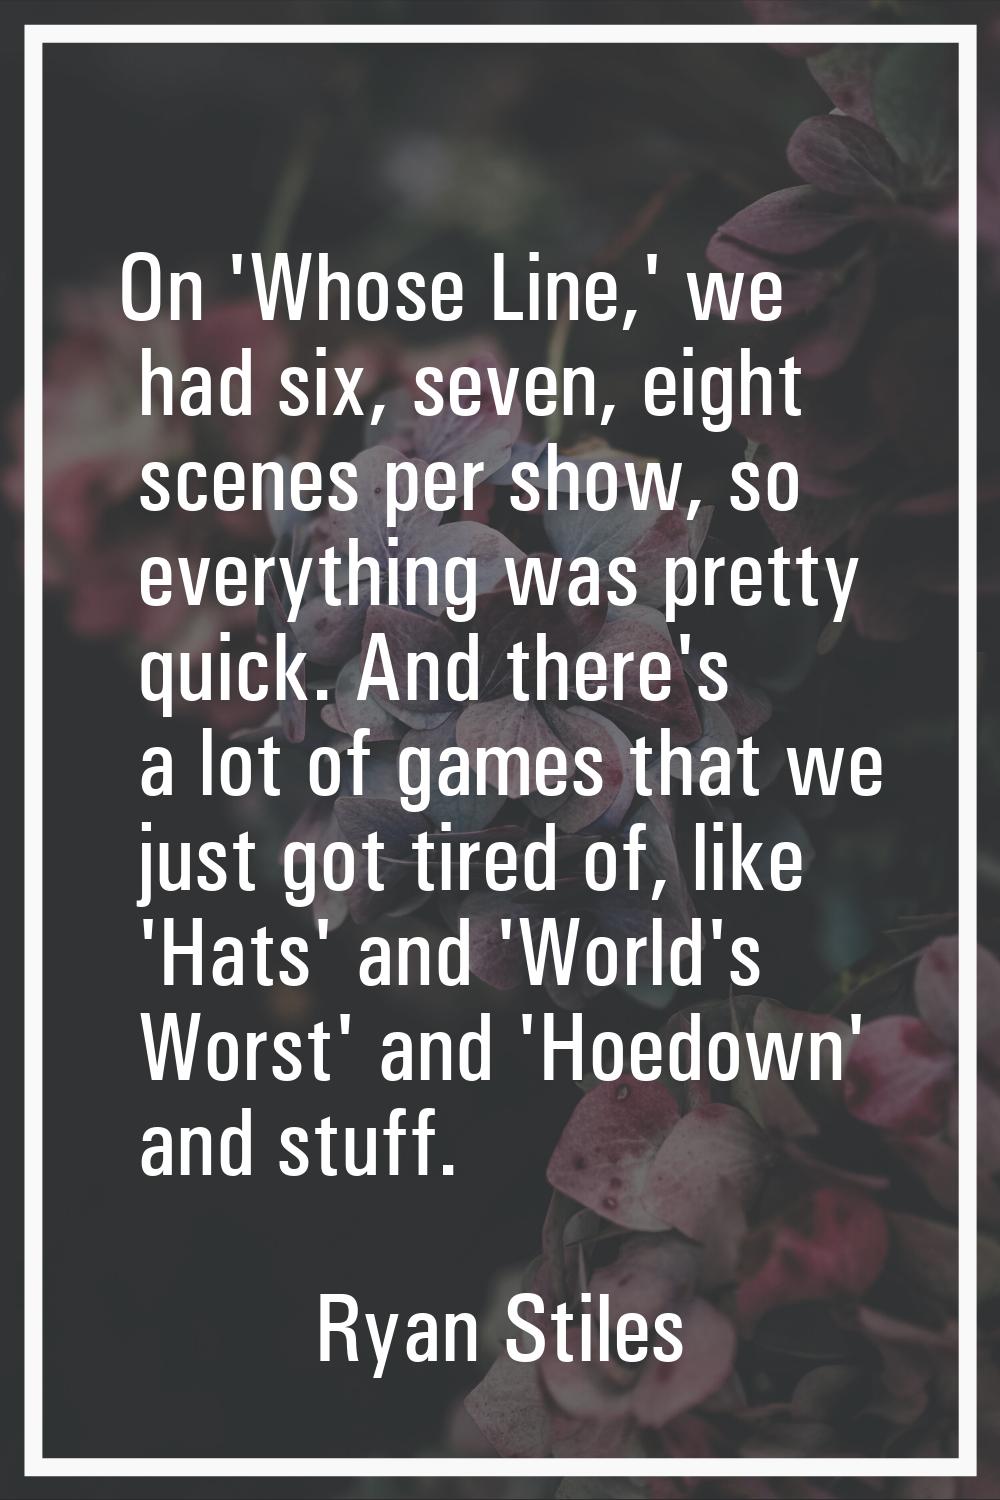 On 'Whose Line,' we had six, seven, eight scenes per show, so everything was pretty quick. And ther